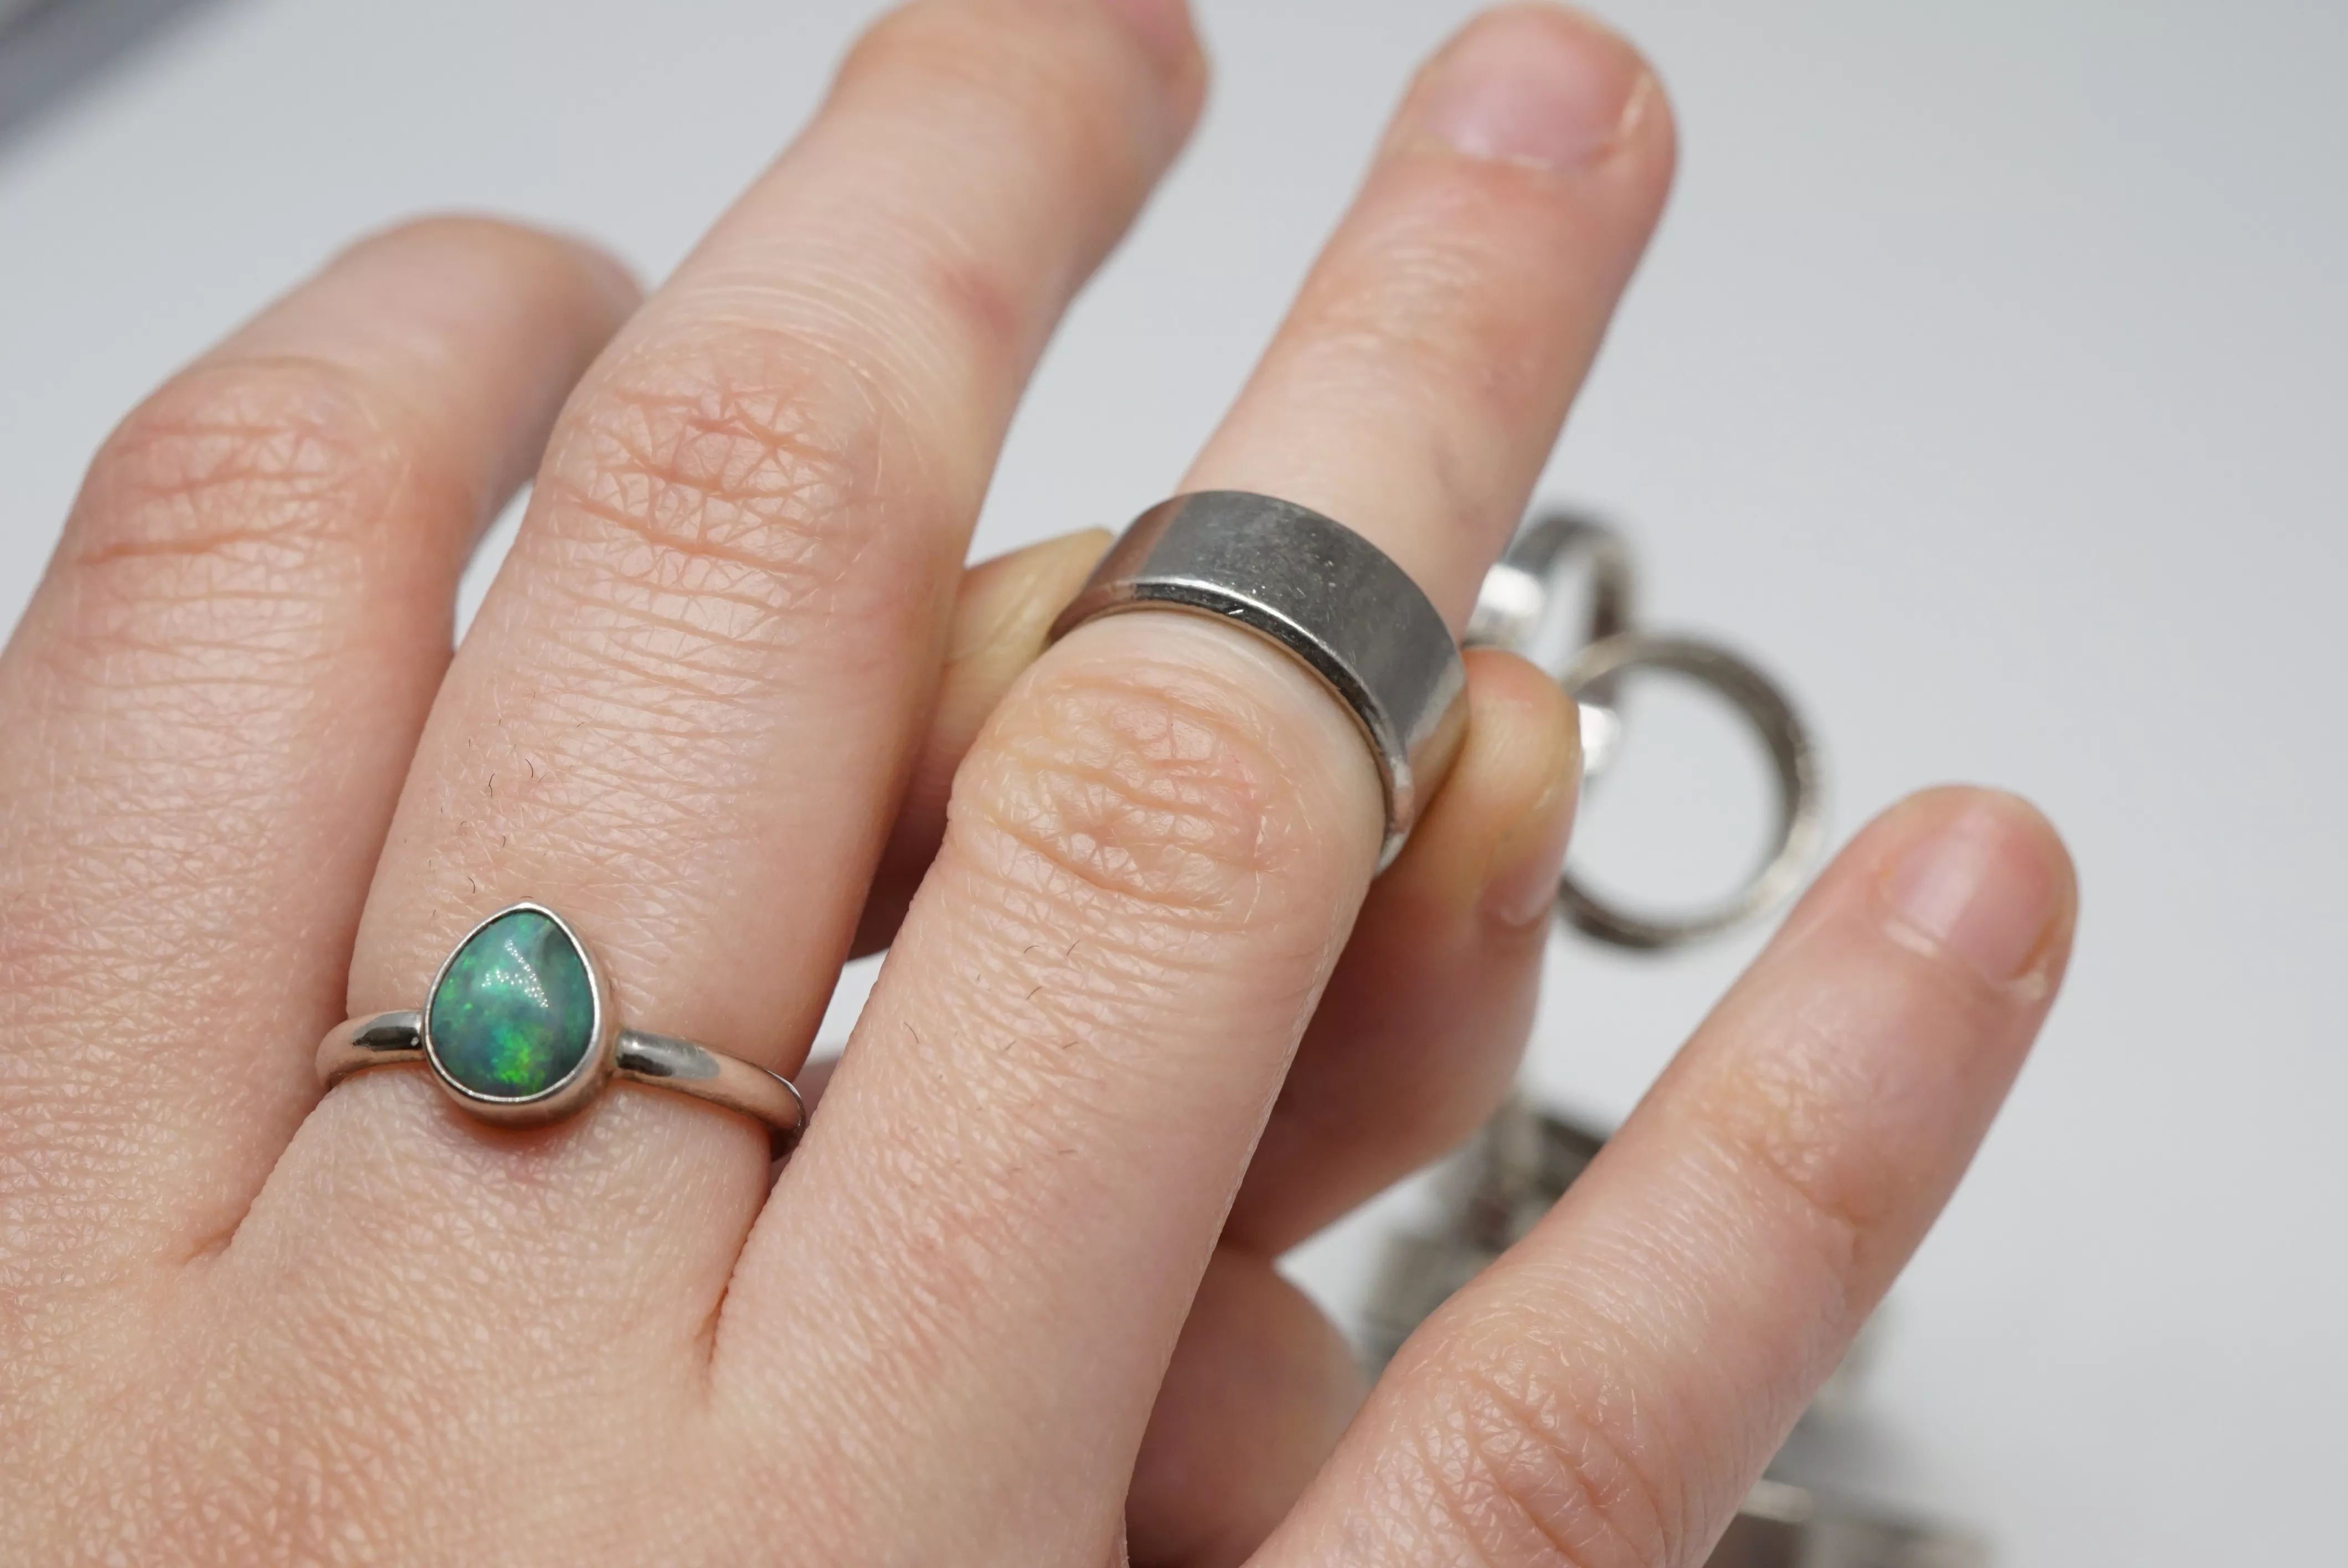 How To Make Your Rings Fit (Large Rings Small Fingers)